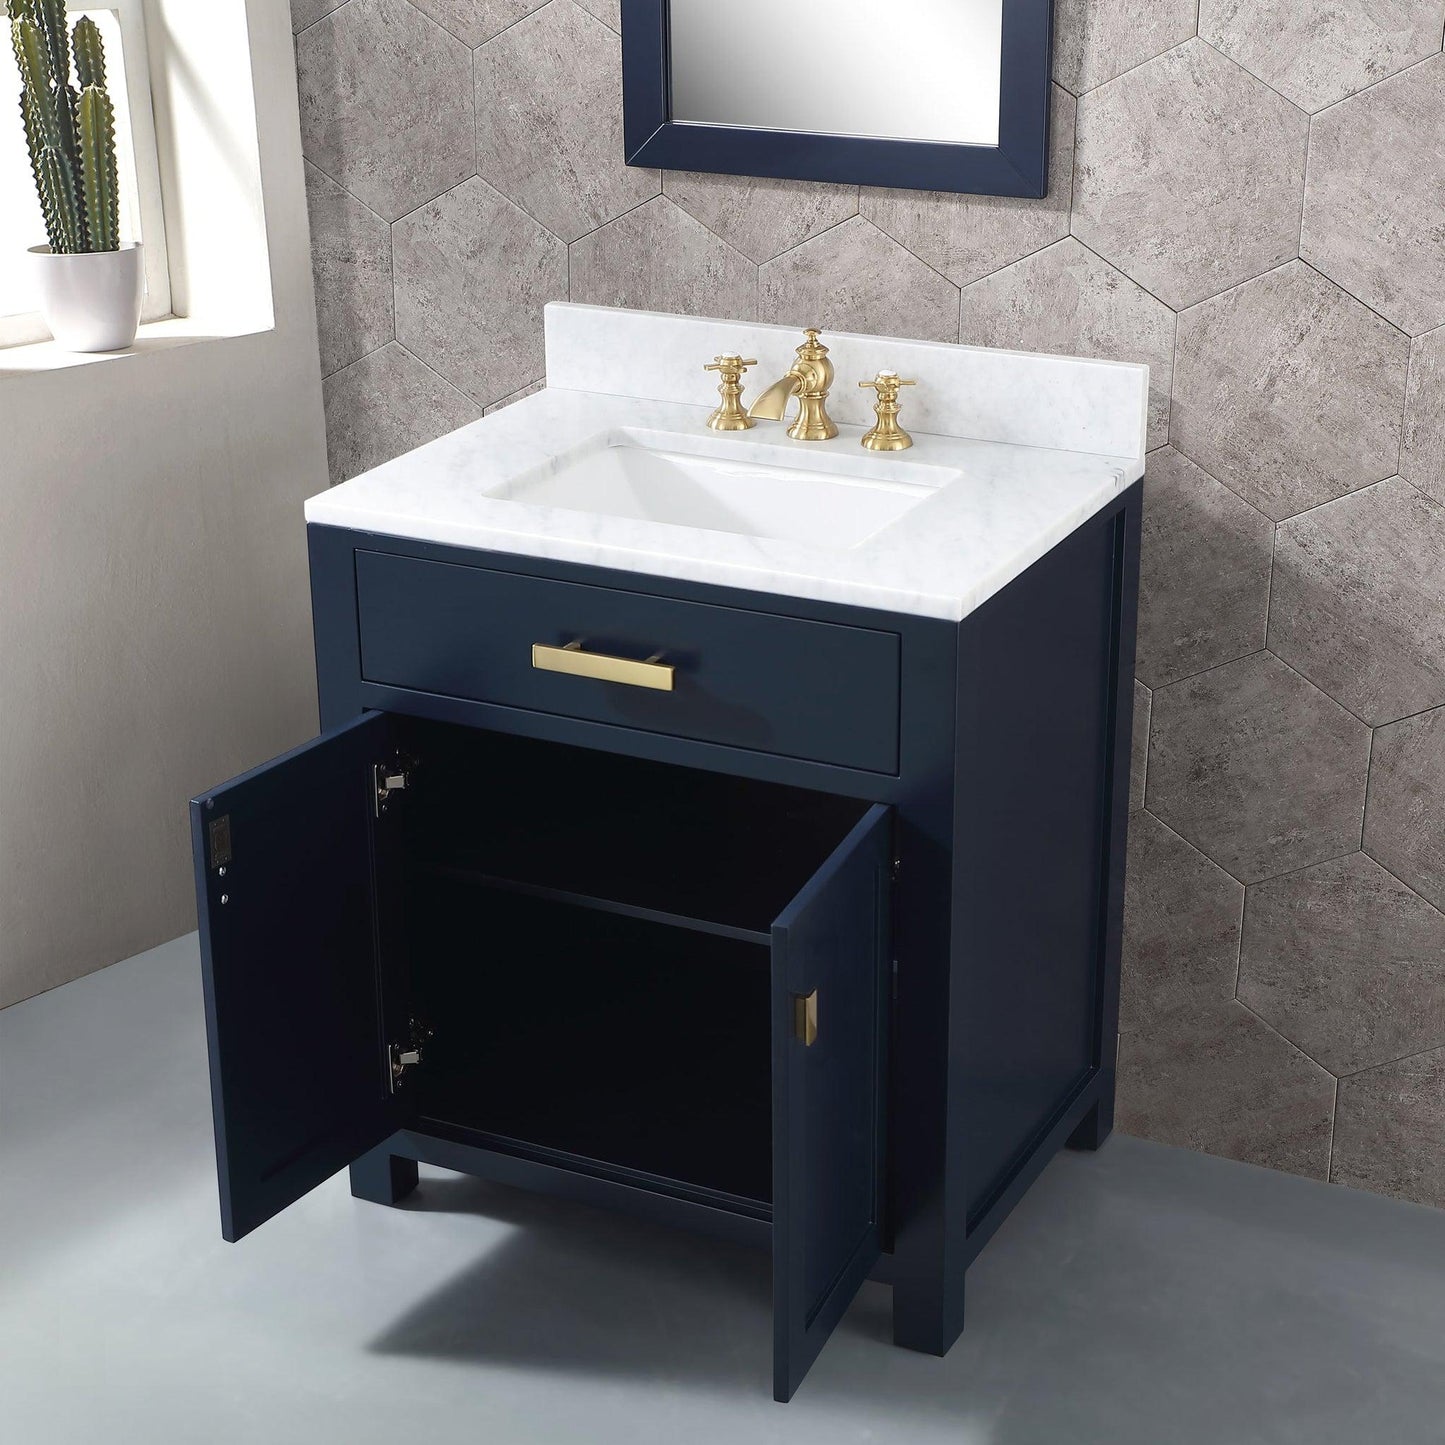 Water Creation Madison 30" Single Sink Carrara White Marble Vanity In Monarch Blue With Matching Mirror and F2-0013-06-FX Lavatory Faucet